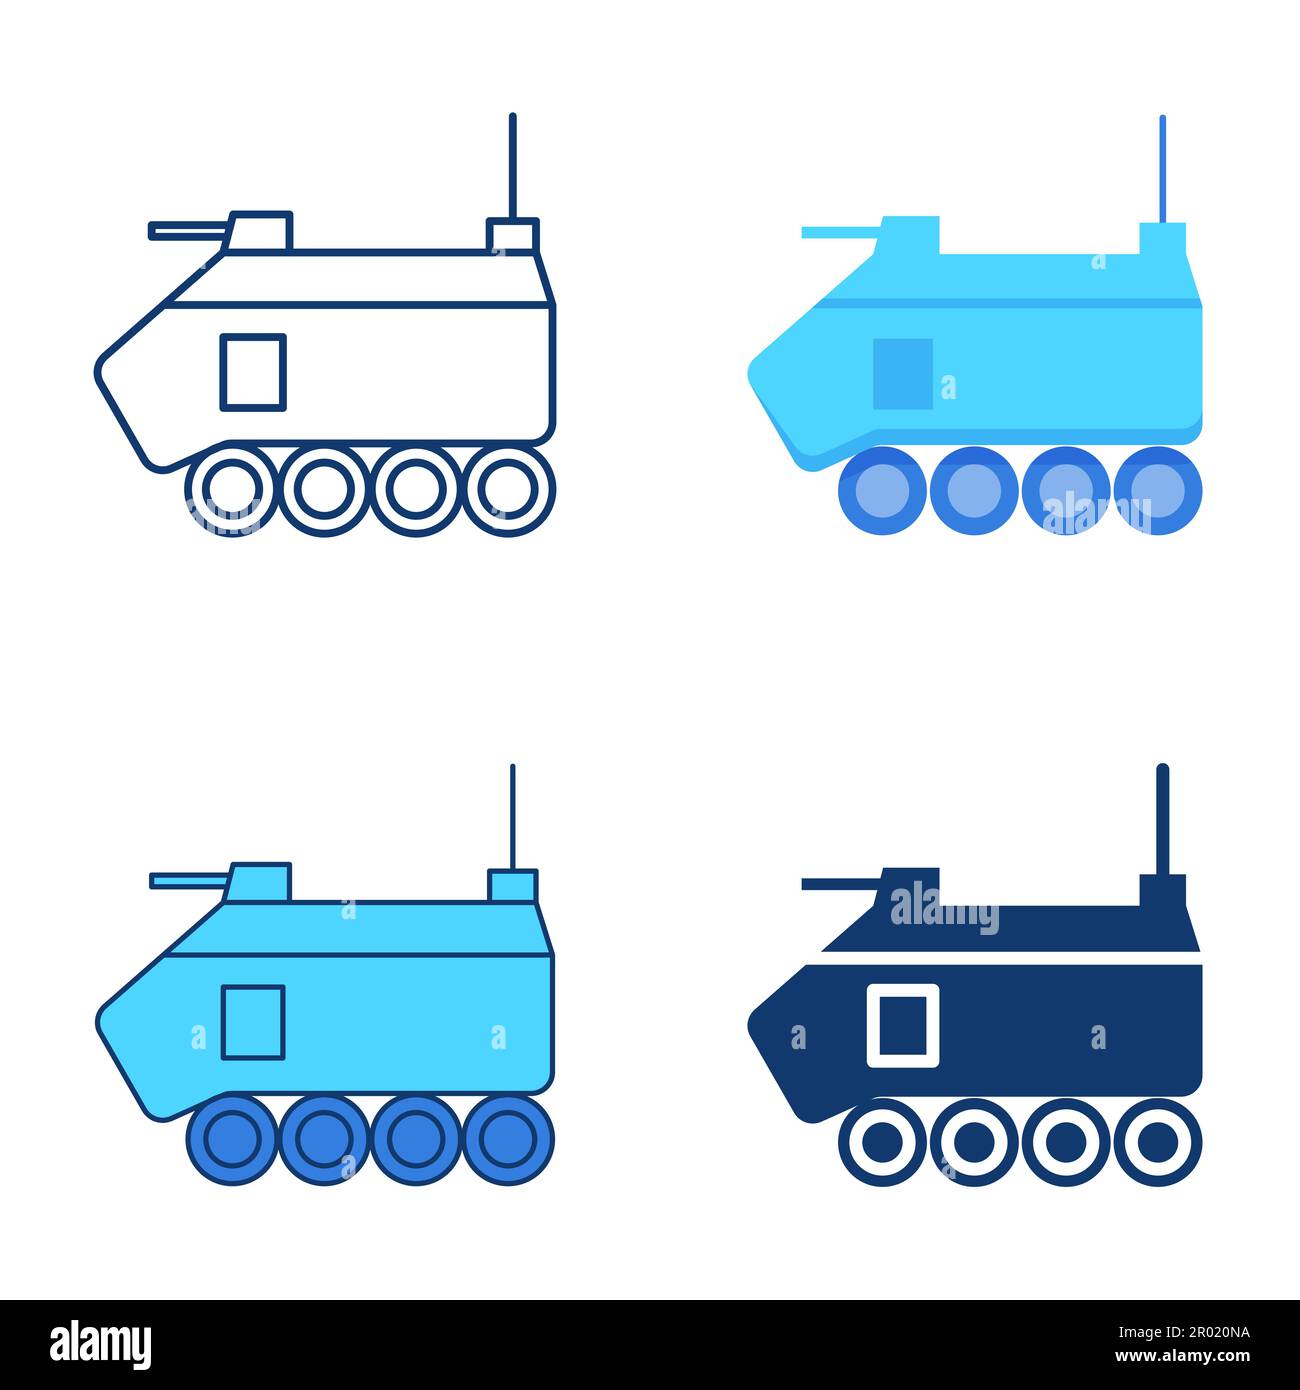 Combat vehicle icon set in flat and line style. Armored amphibious military vehicle. Vector illustration Stock Vector